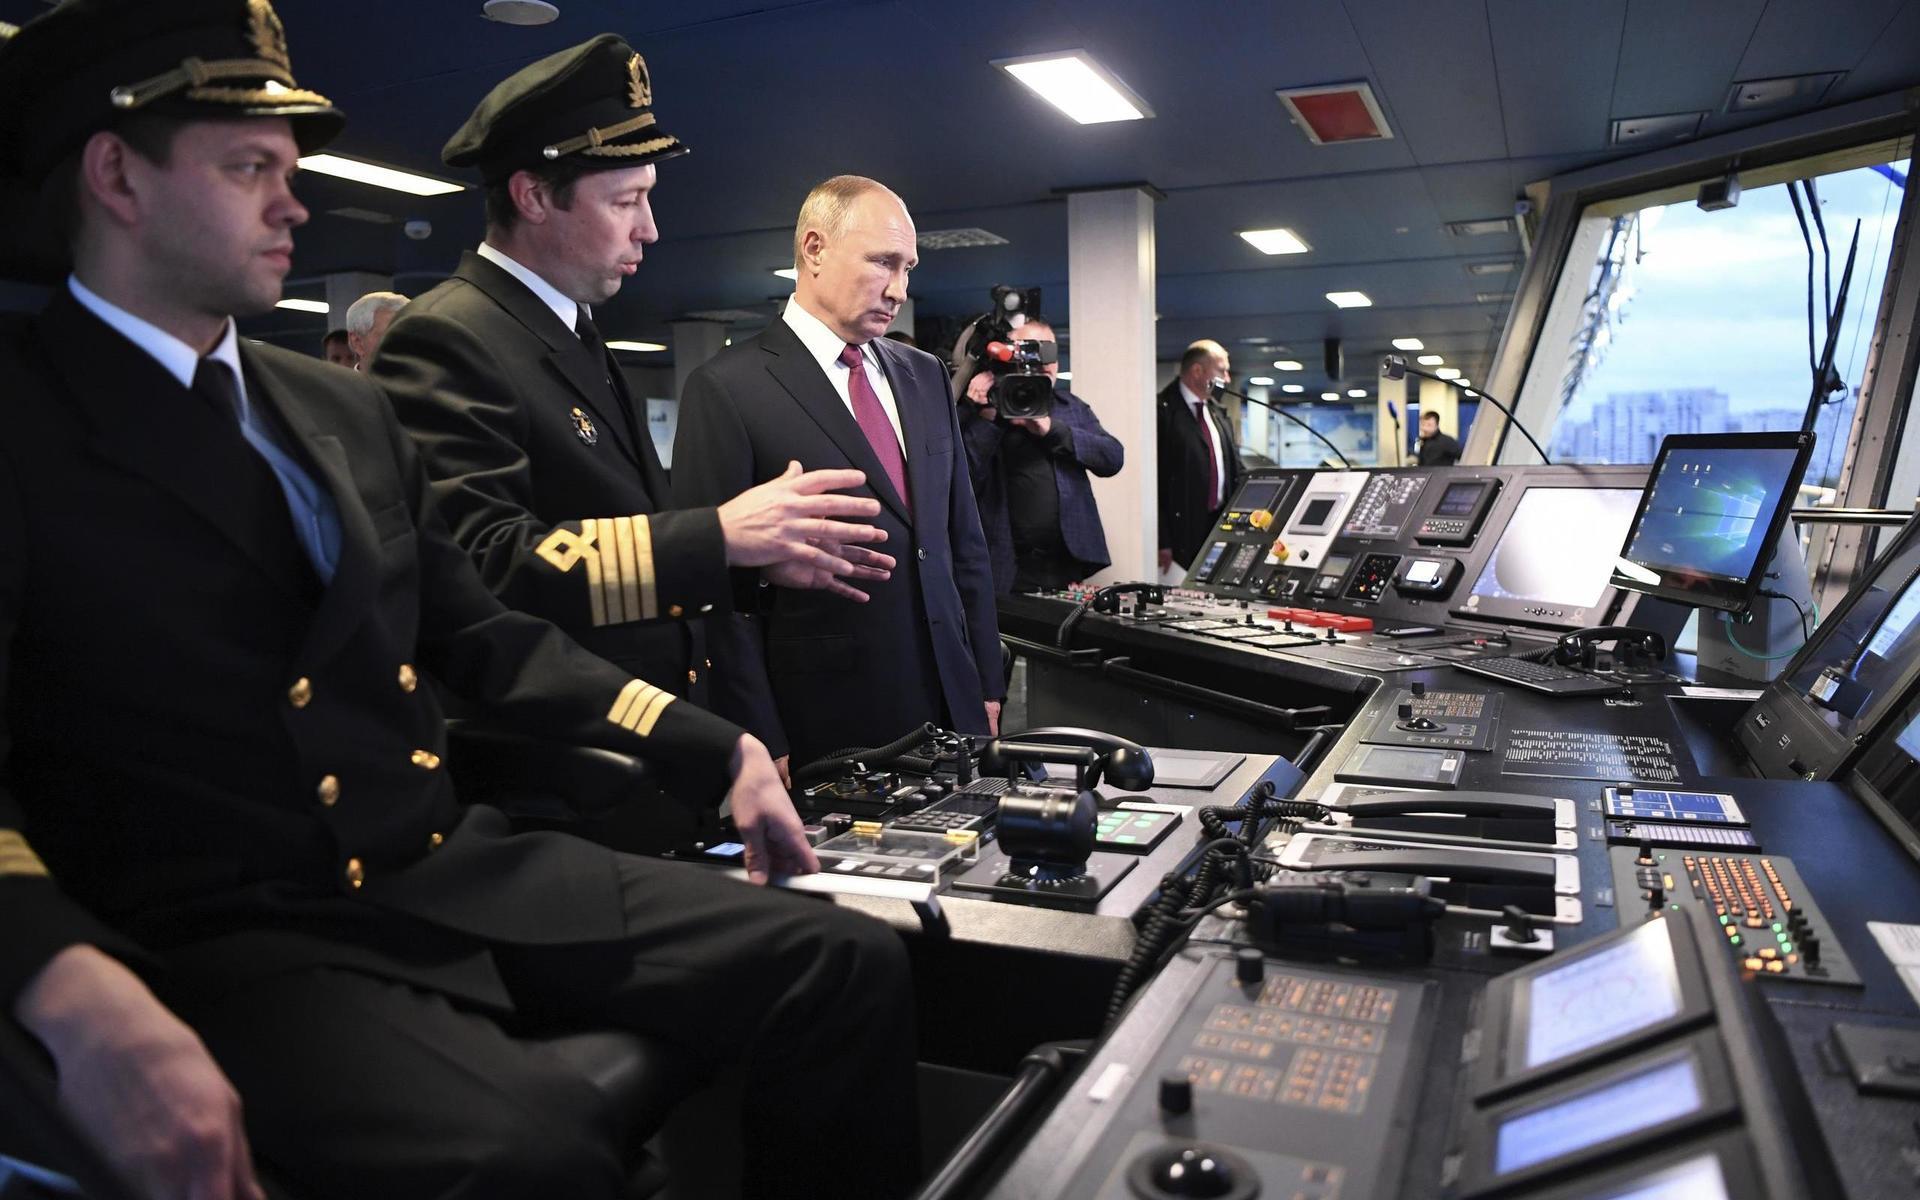 Russian President Vladimir Putin, center, visits the captain&apos;s bridge of the newly built diesel-electric icebreaker &quot;Viktor Chernomyrdin&quot; in St. Petersburg, Russia, Tuesday, Nov. 3, 2020. Putin said that Russia will expand its fleet of icebreakers as part of its efforts to develop the Arctic territories. (Alexei Nikolsky, Sputnik, Kremlin Pool Photo via AP)  XAZ101